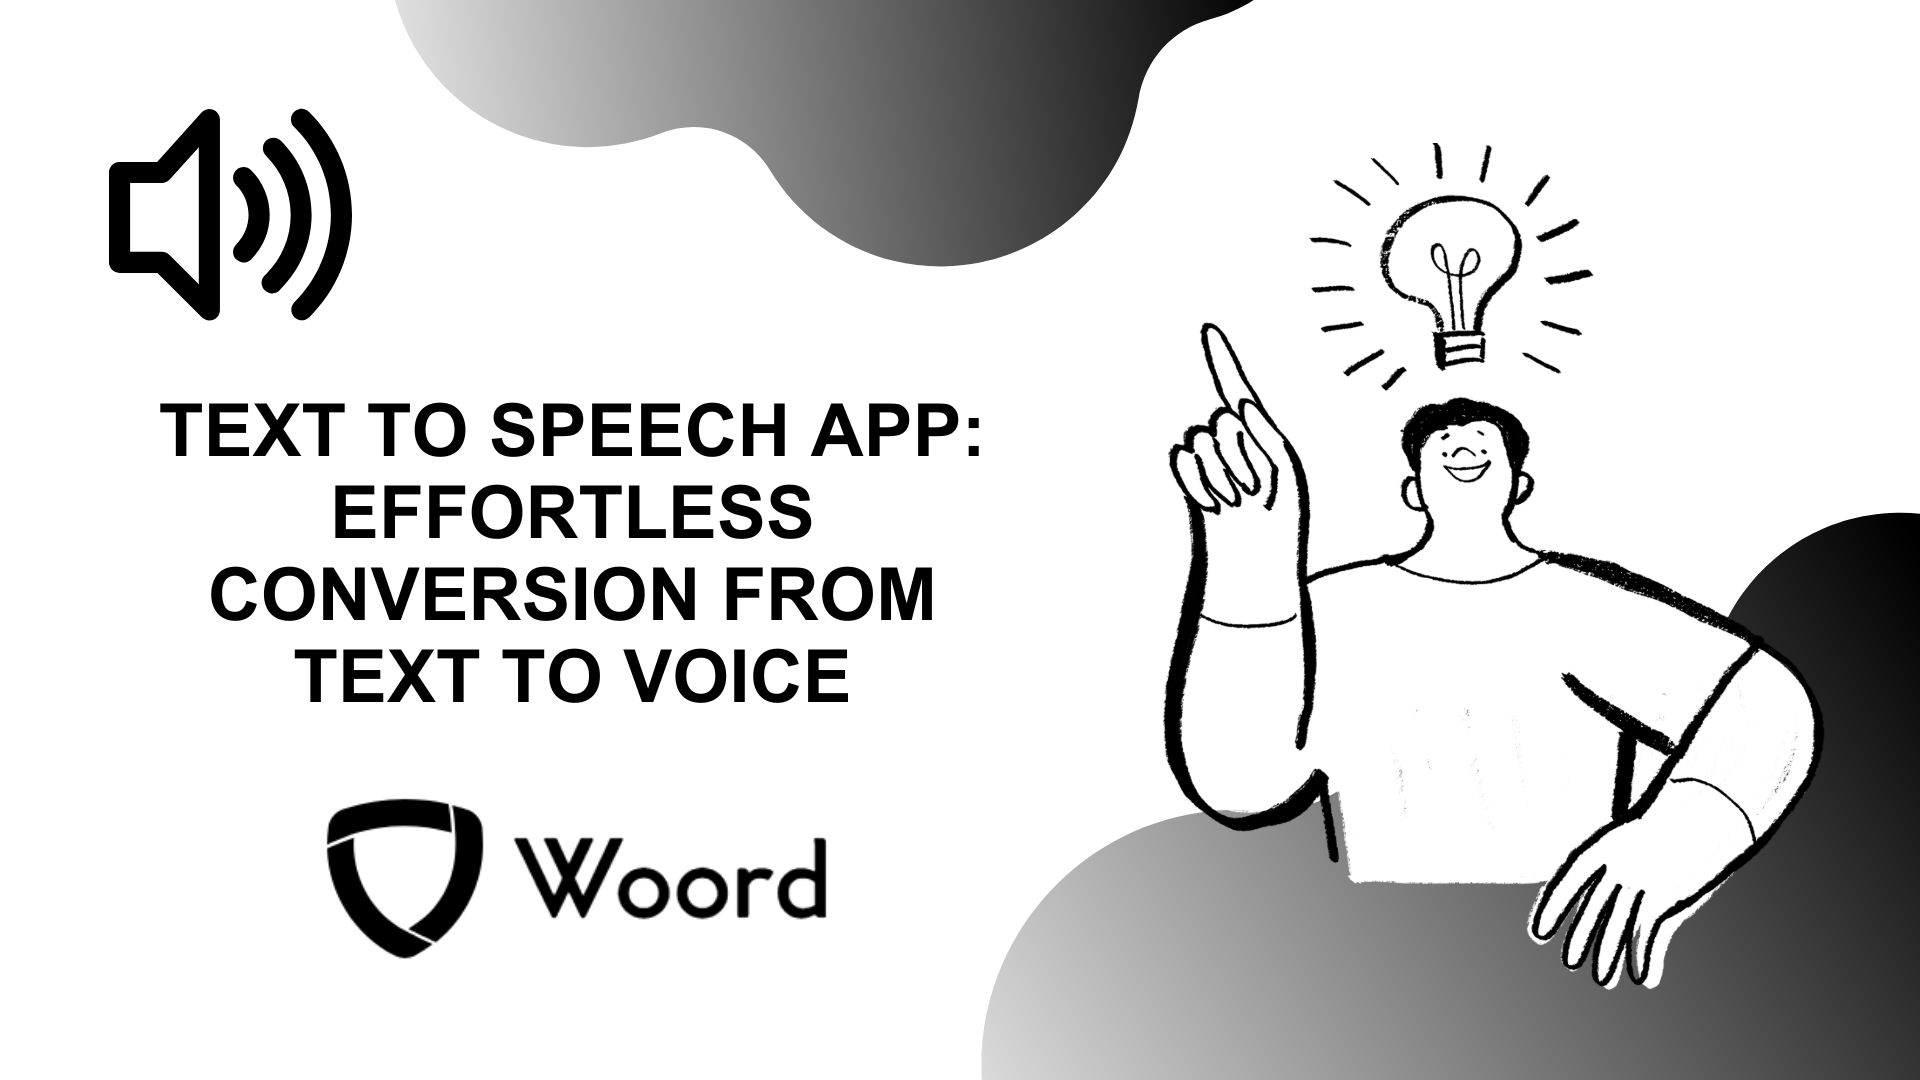 Text To Speech App: Effortless Conversion From Text To Voice